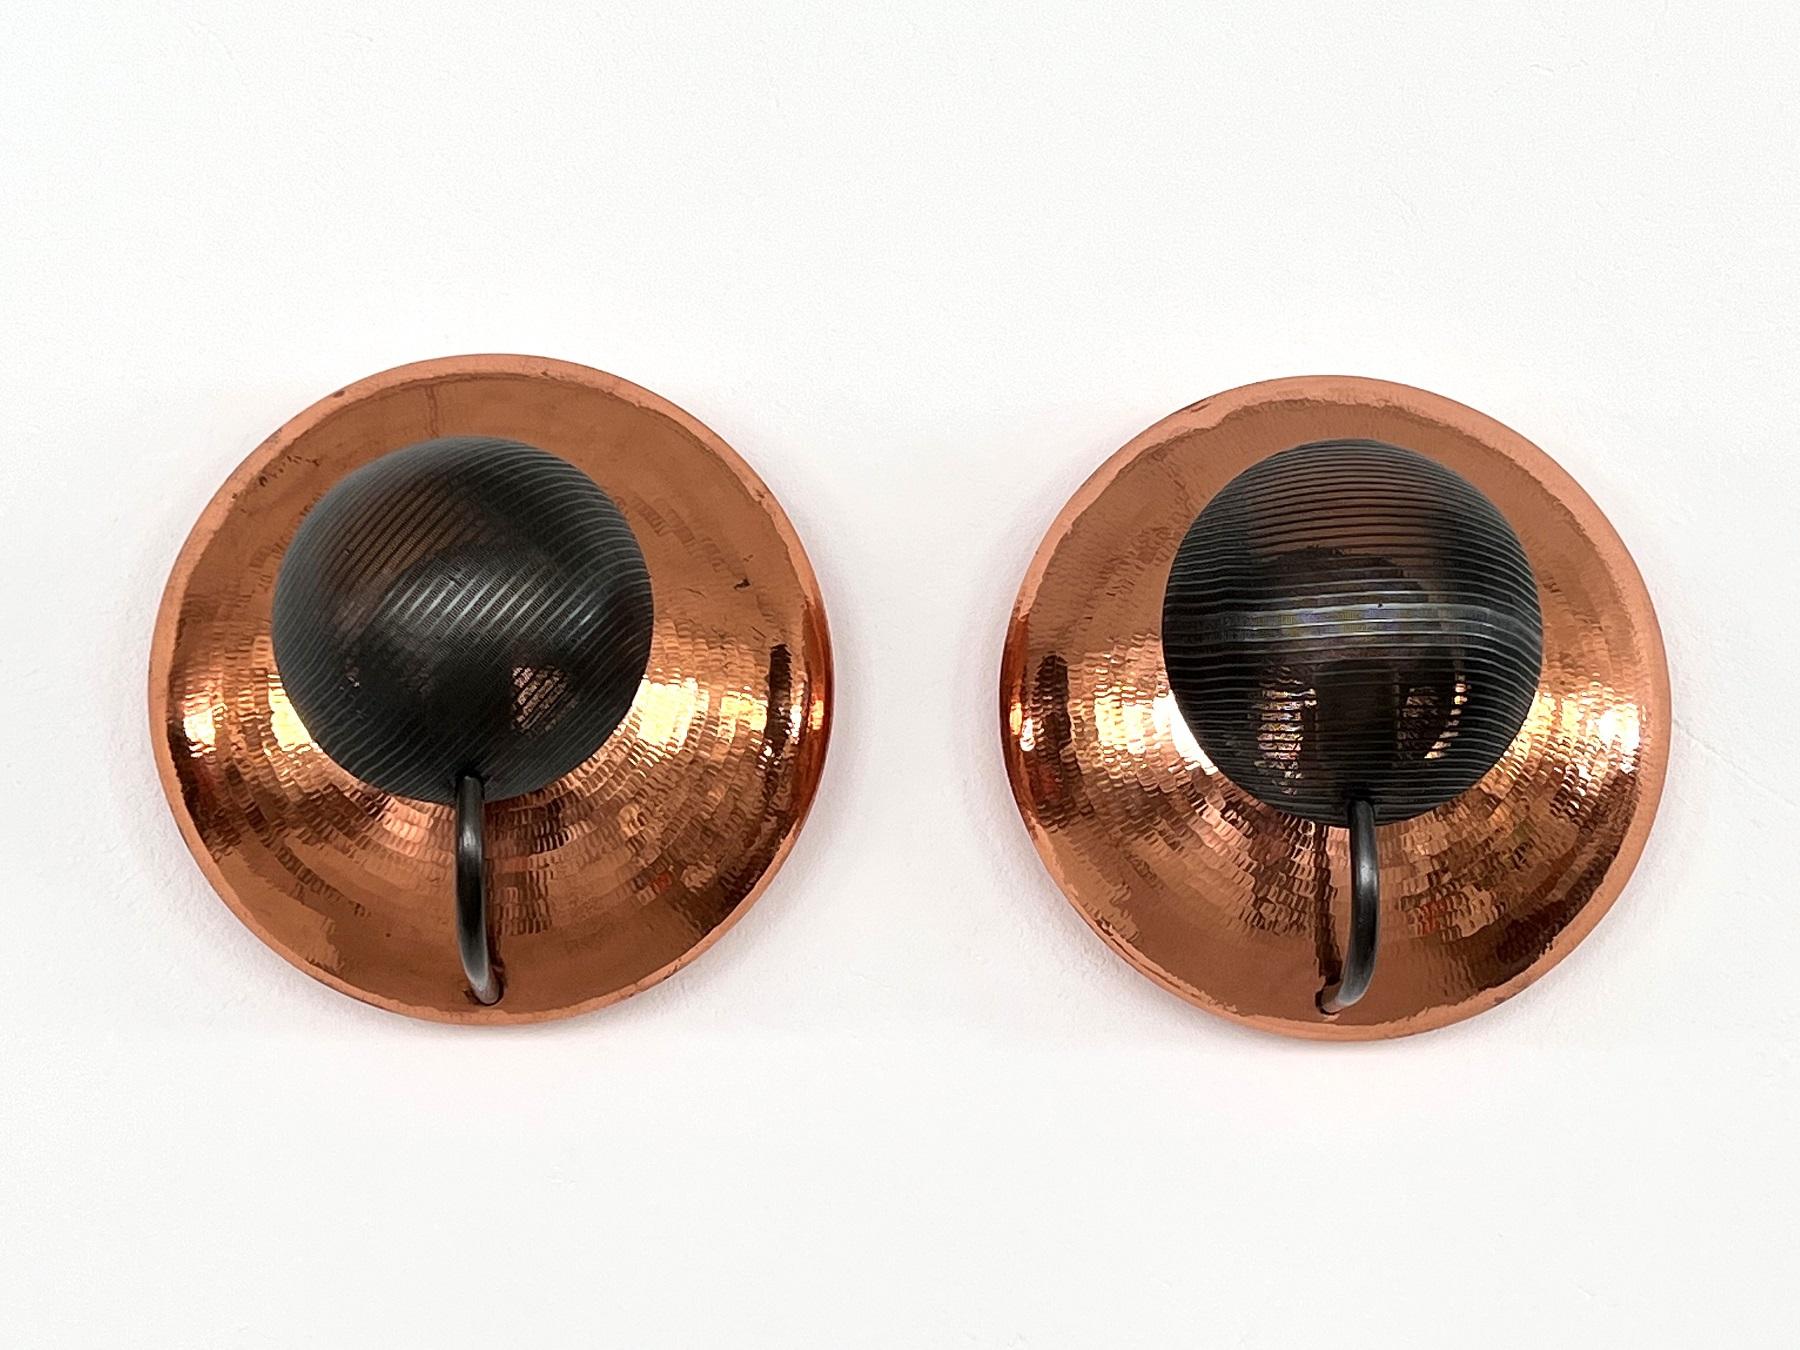 Pair of Italian Wall Sconces in Copper and Black Perforated Metal, 1970s For Sale 11